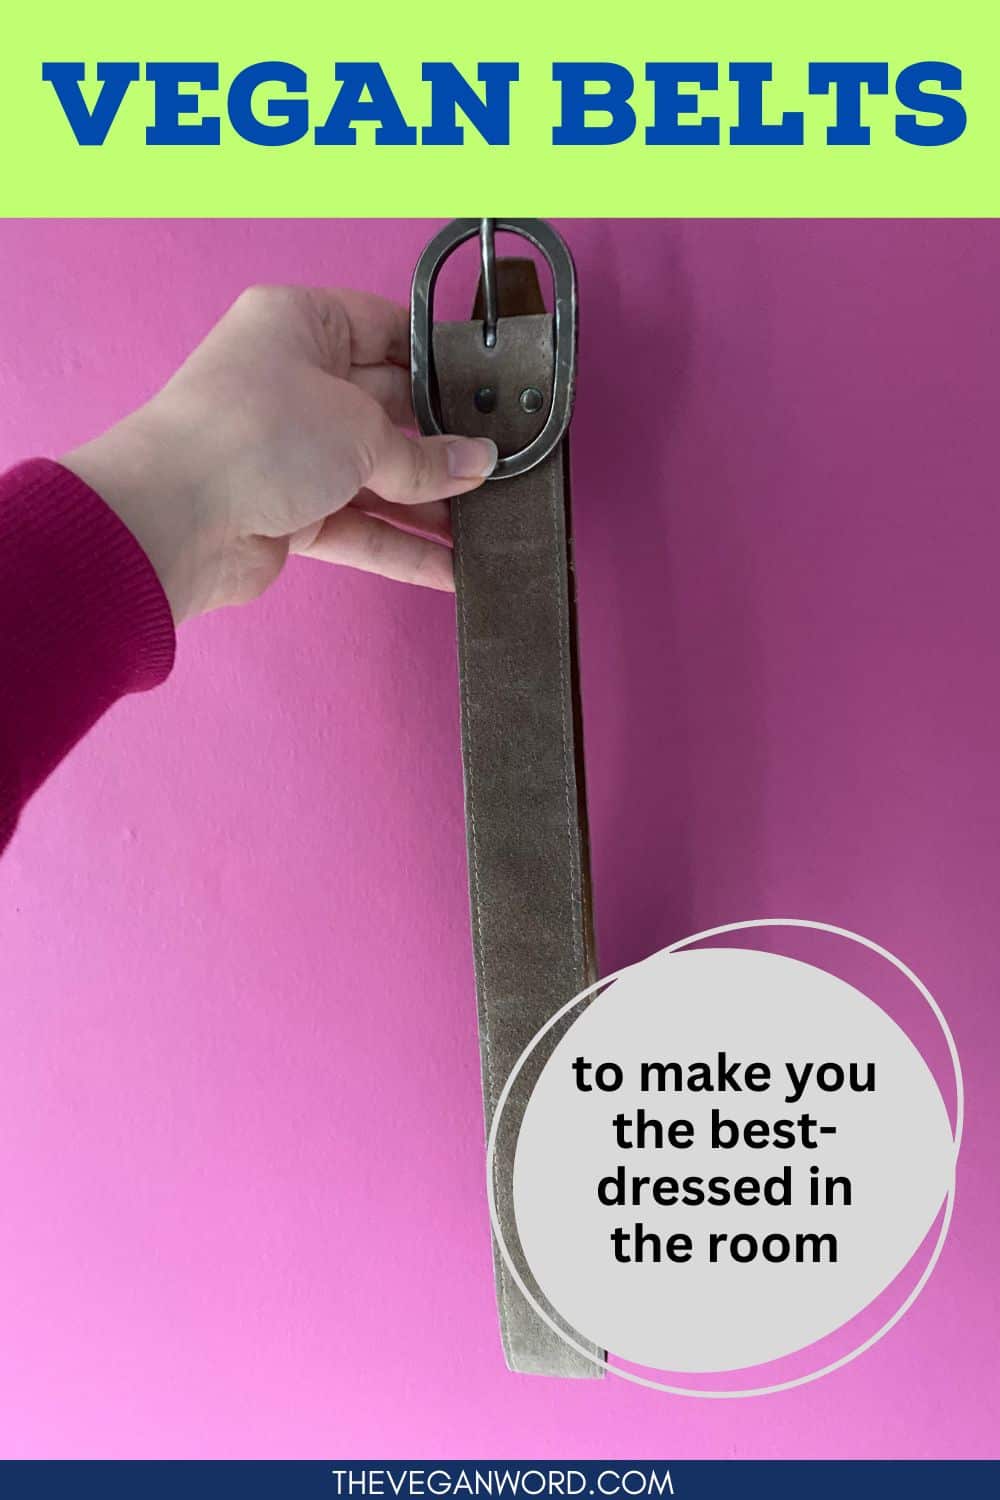 Grey belt on a pink background with text that reads "vegan belts to make you the best-dressed in the room"